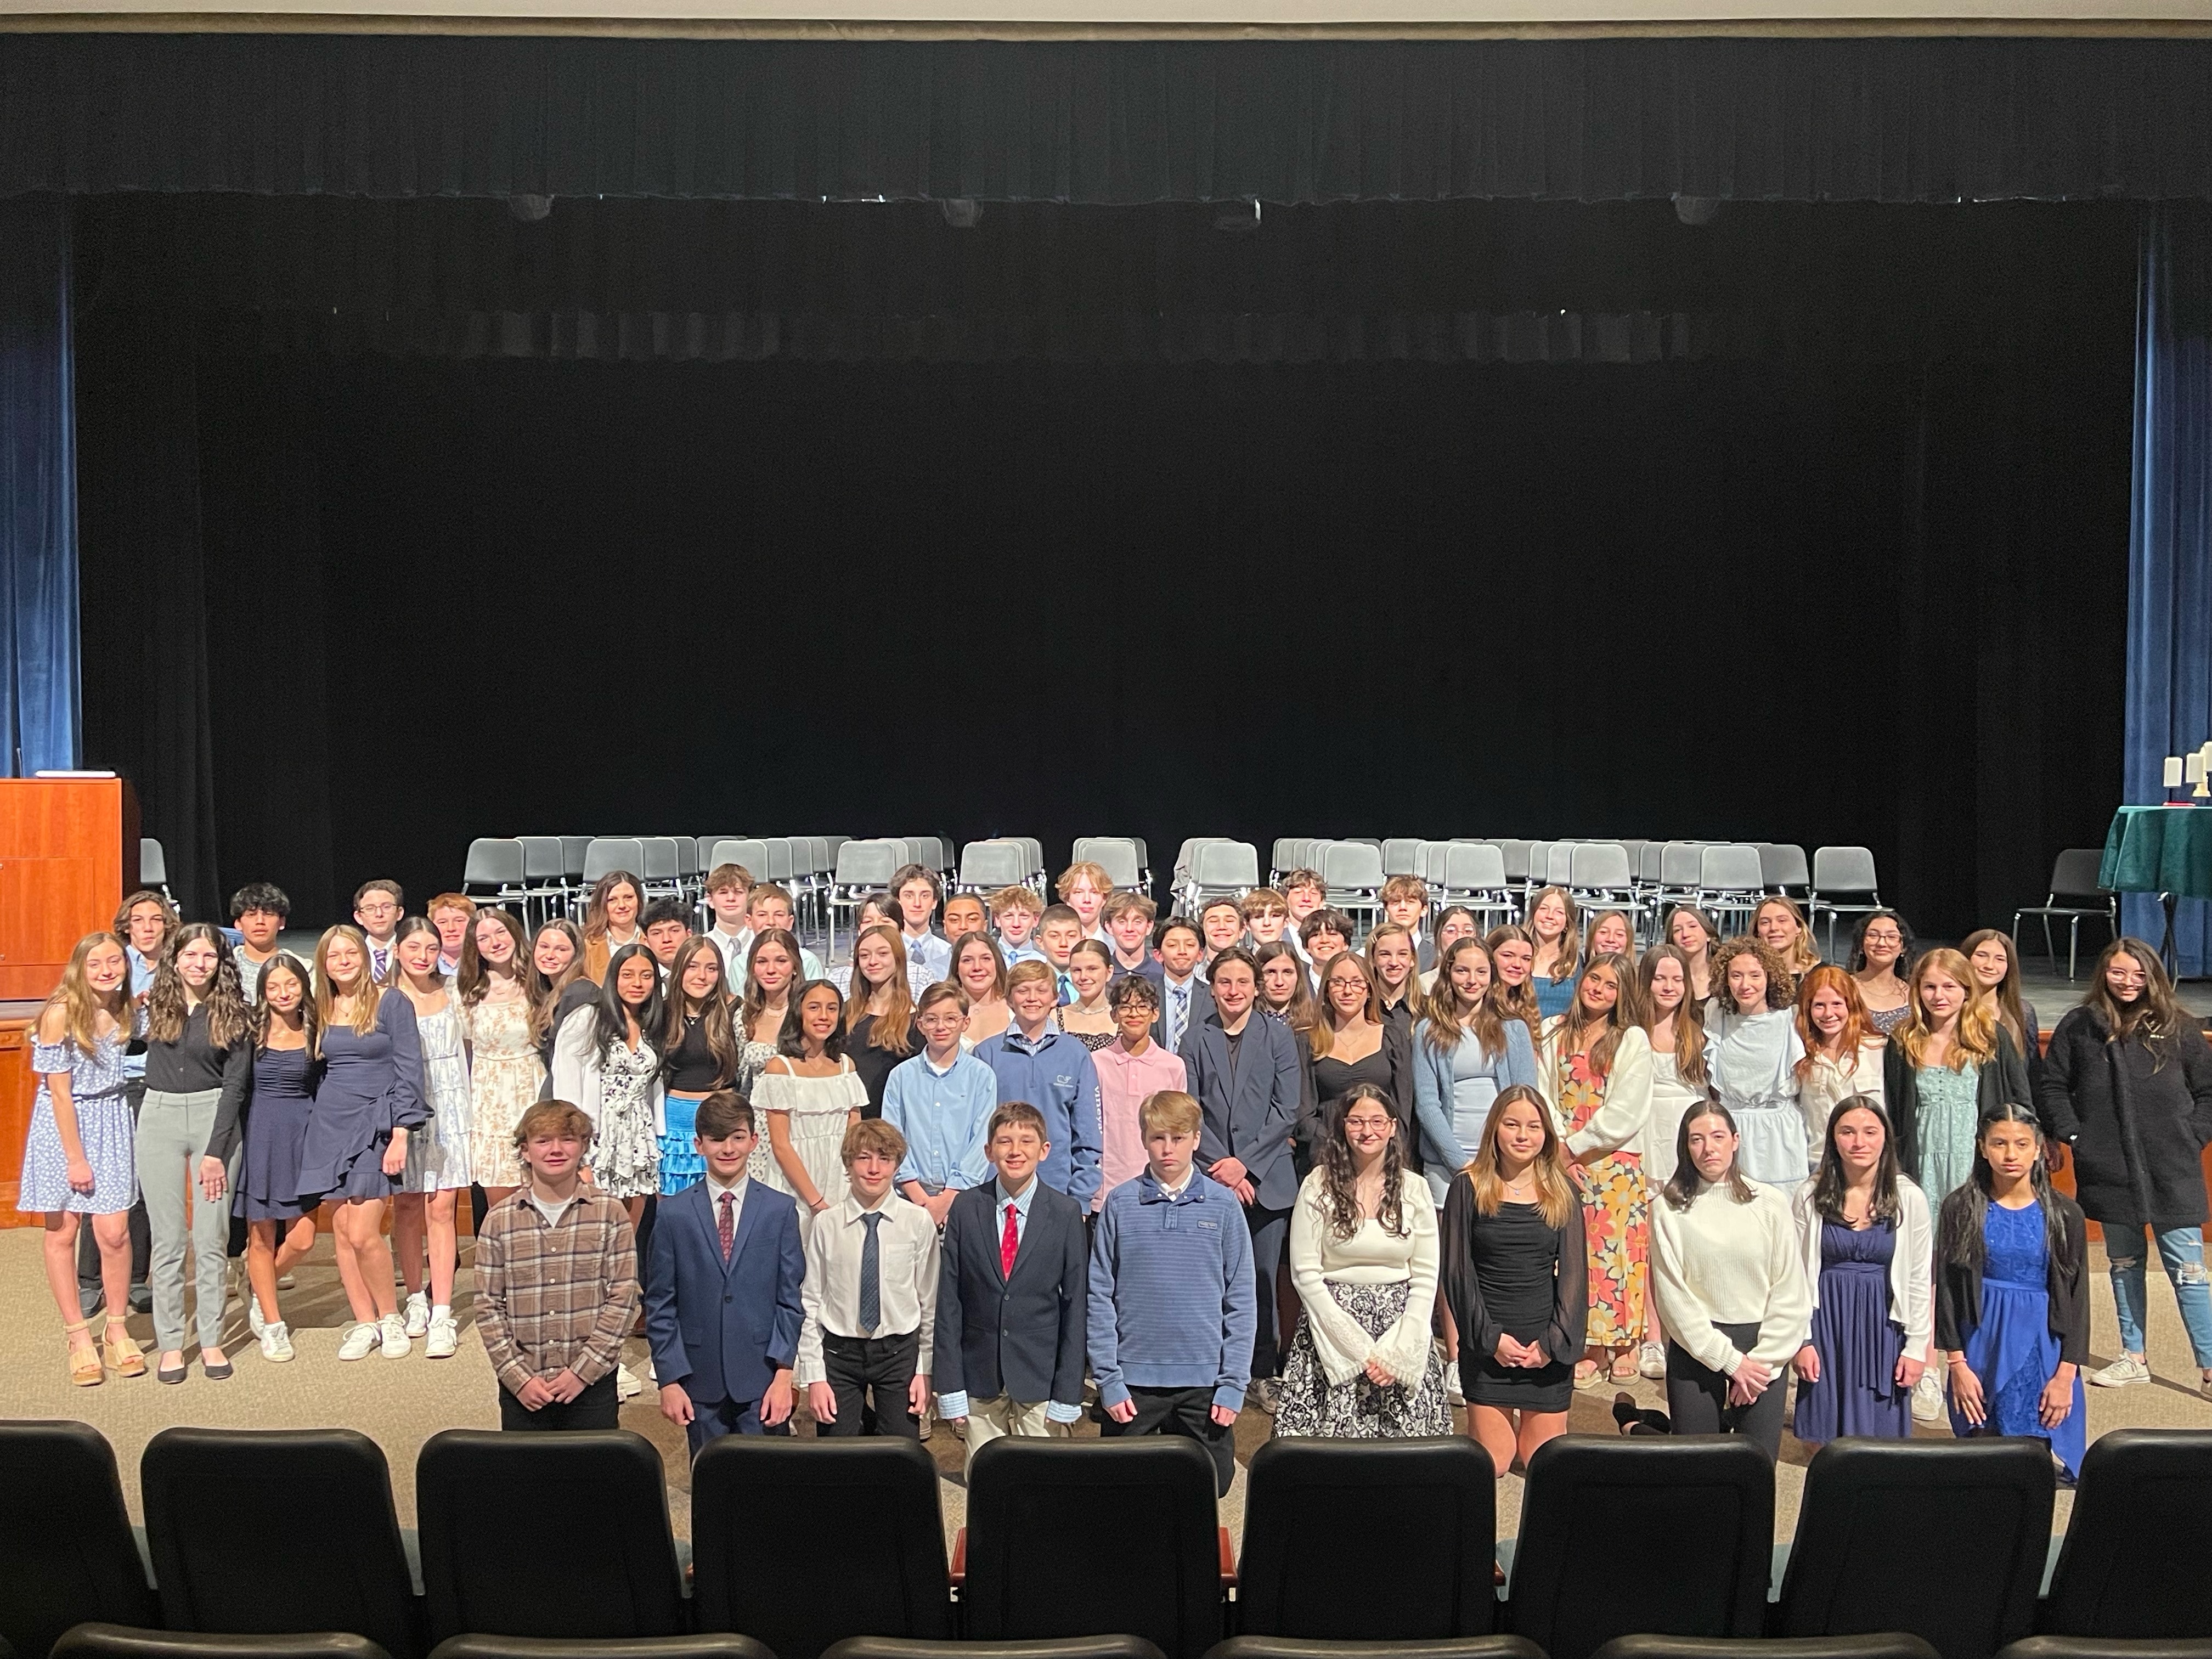 Westhampton Beach Middle School is proud to announce that 73 students have been named as National Junior Honor Society members. COURTESY WESTHAMPTON BEACH SCHOOL DISTRICT